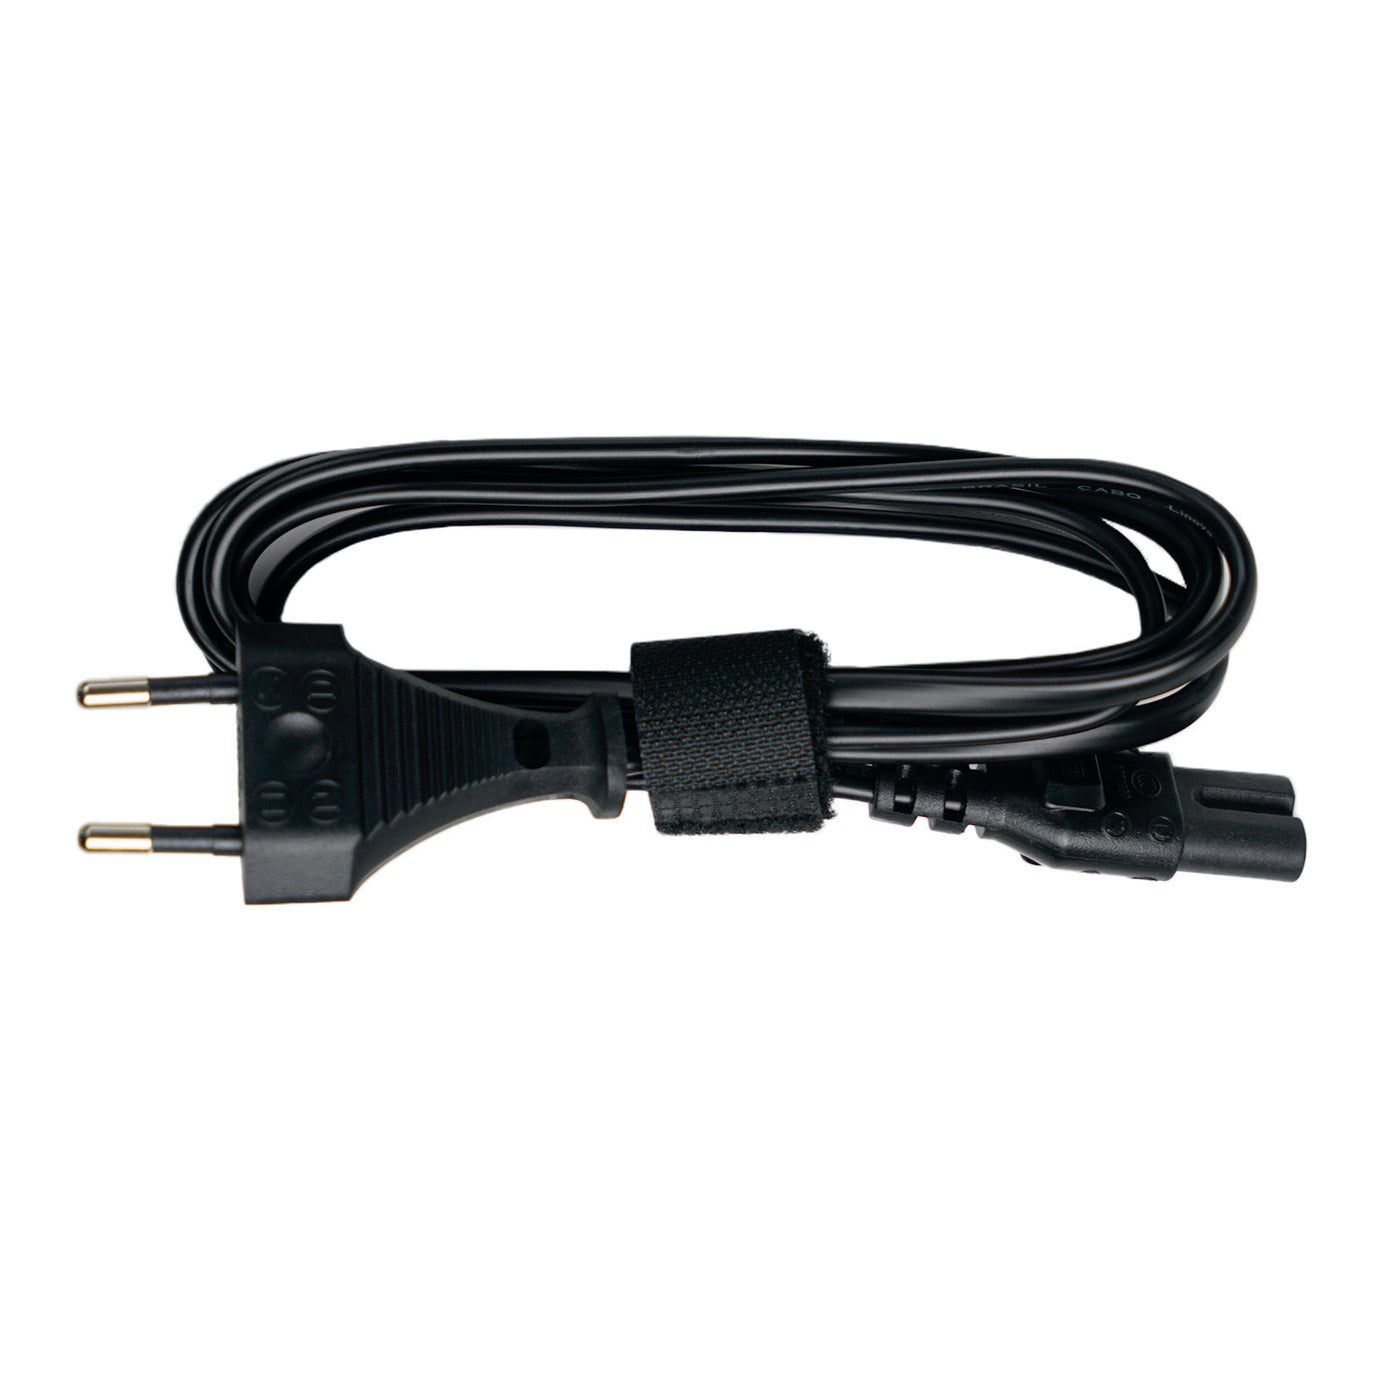 Power cord for ZACO A11s Pro vacuuming and mopping robot